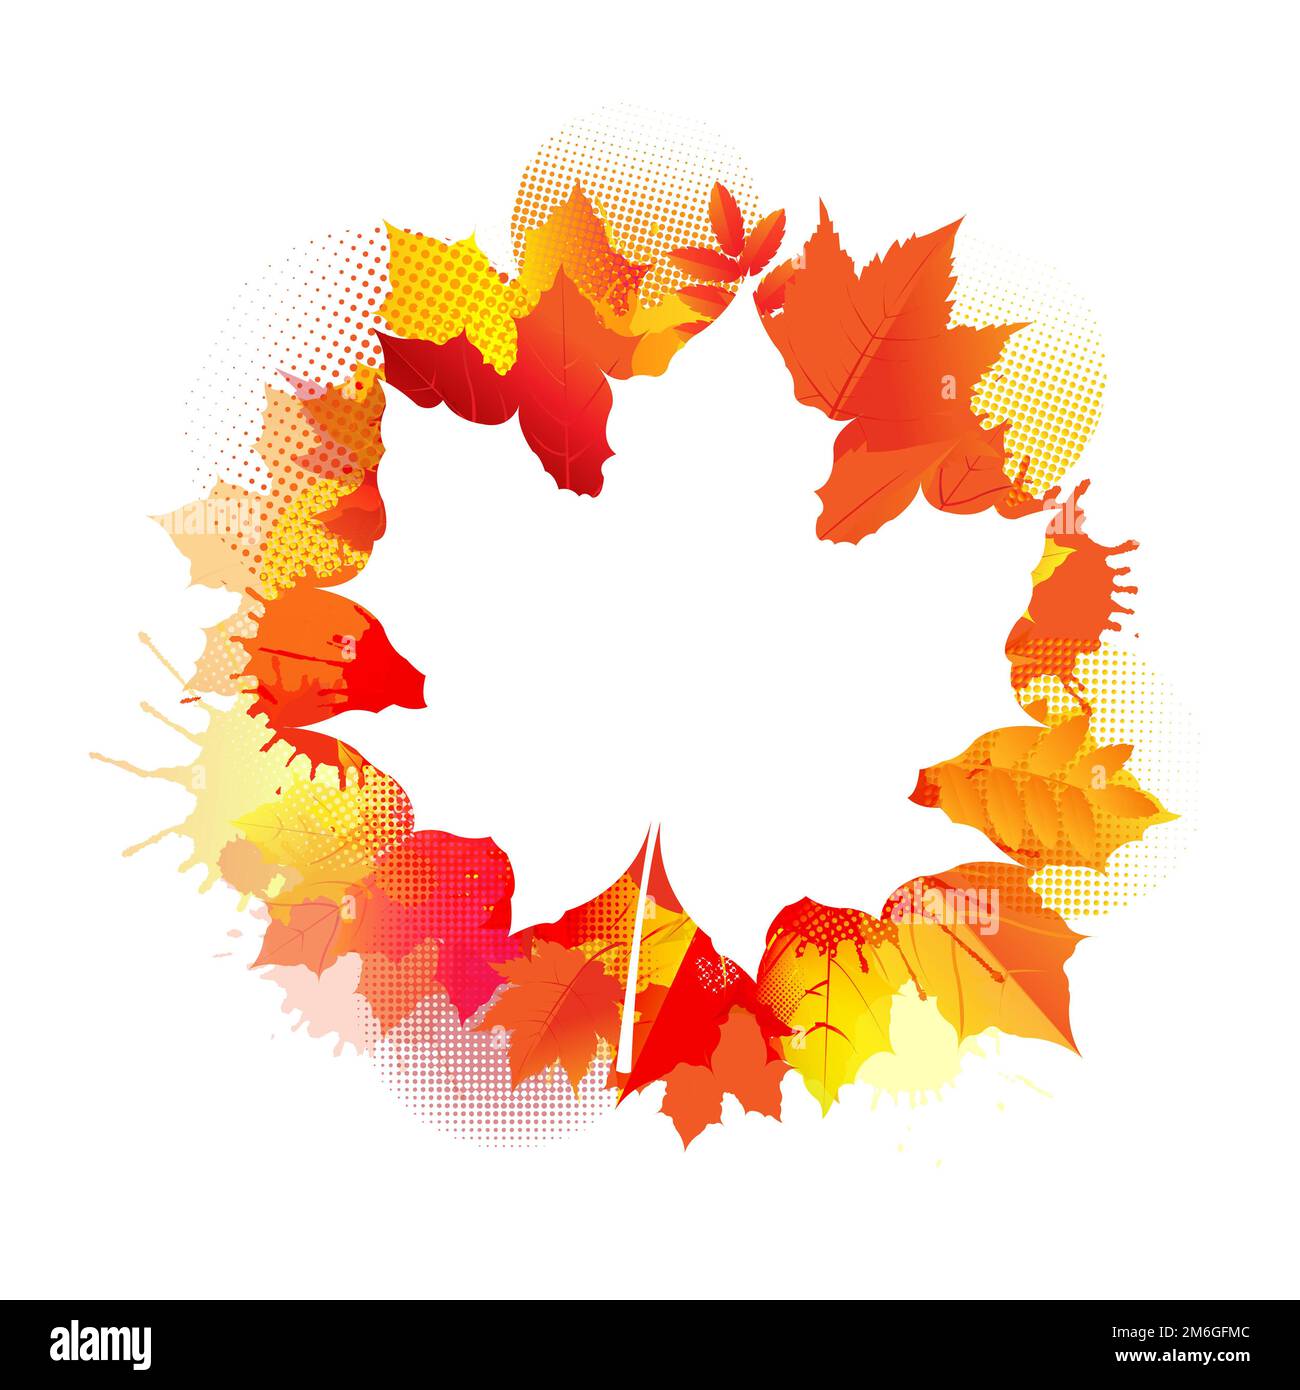 Autumn Poster With Stain And Leaves Poster Stock Photo - Alamy